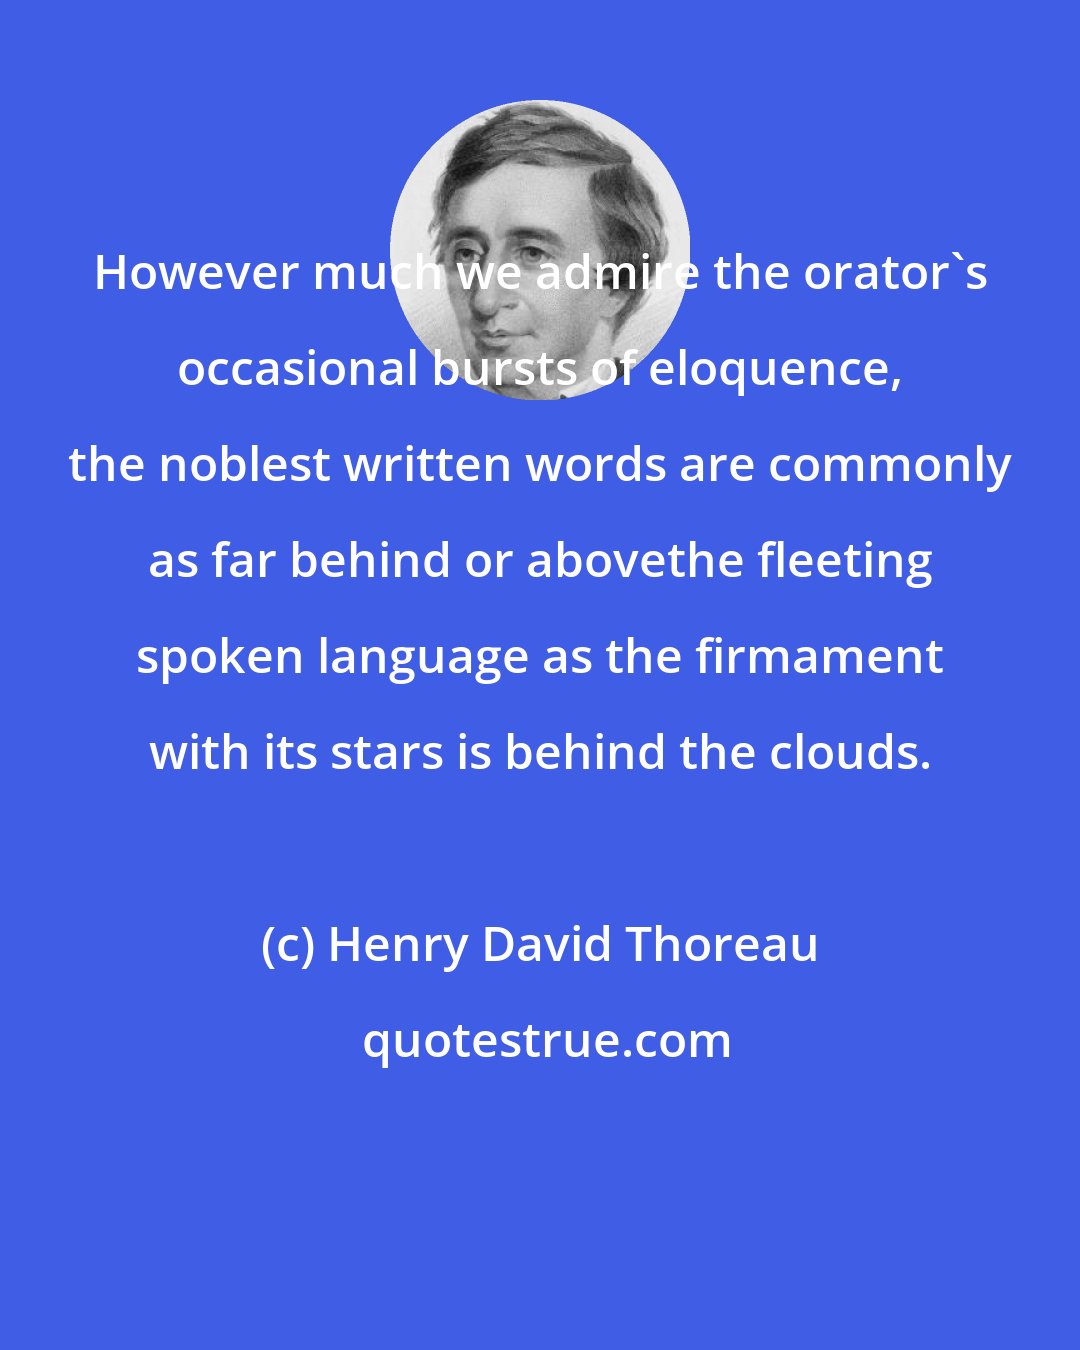 Henry David Thoreau: However much we admire the orator's occasional bursts of eloquence, the noblest written words are commonly as far behind or abovethe fleeting spoken language as the firmament with its stars is behind the clouds.